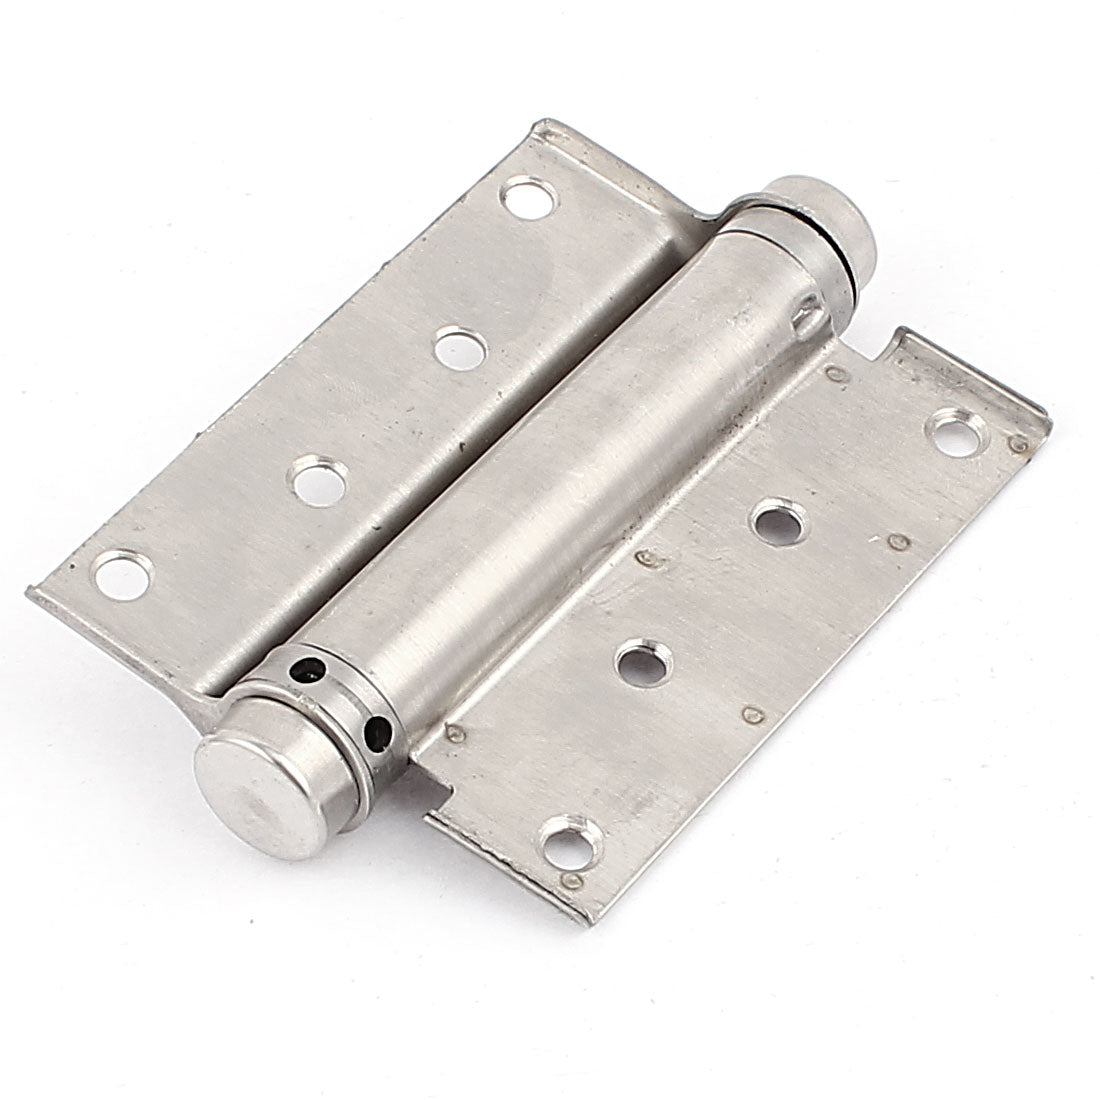 uxcell Uxcell 100mm Length Stainless Steel Square Corner Single Action Spring Door Hinge 2Pcs